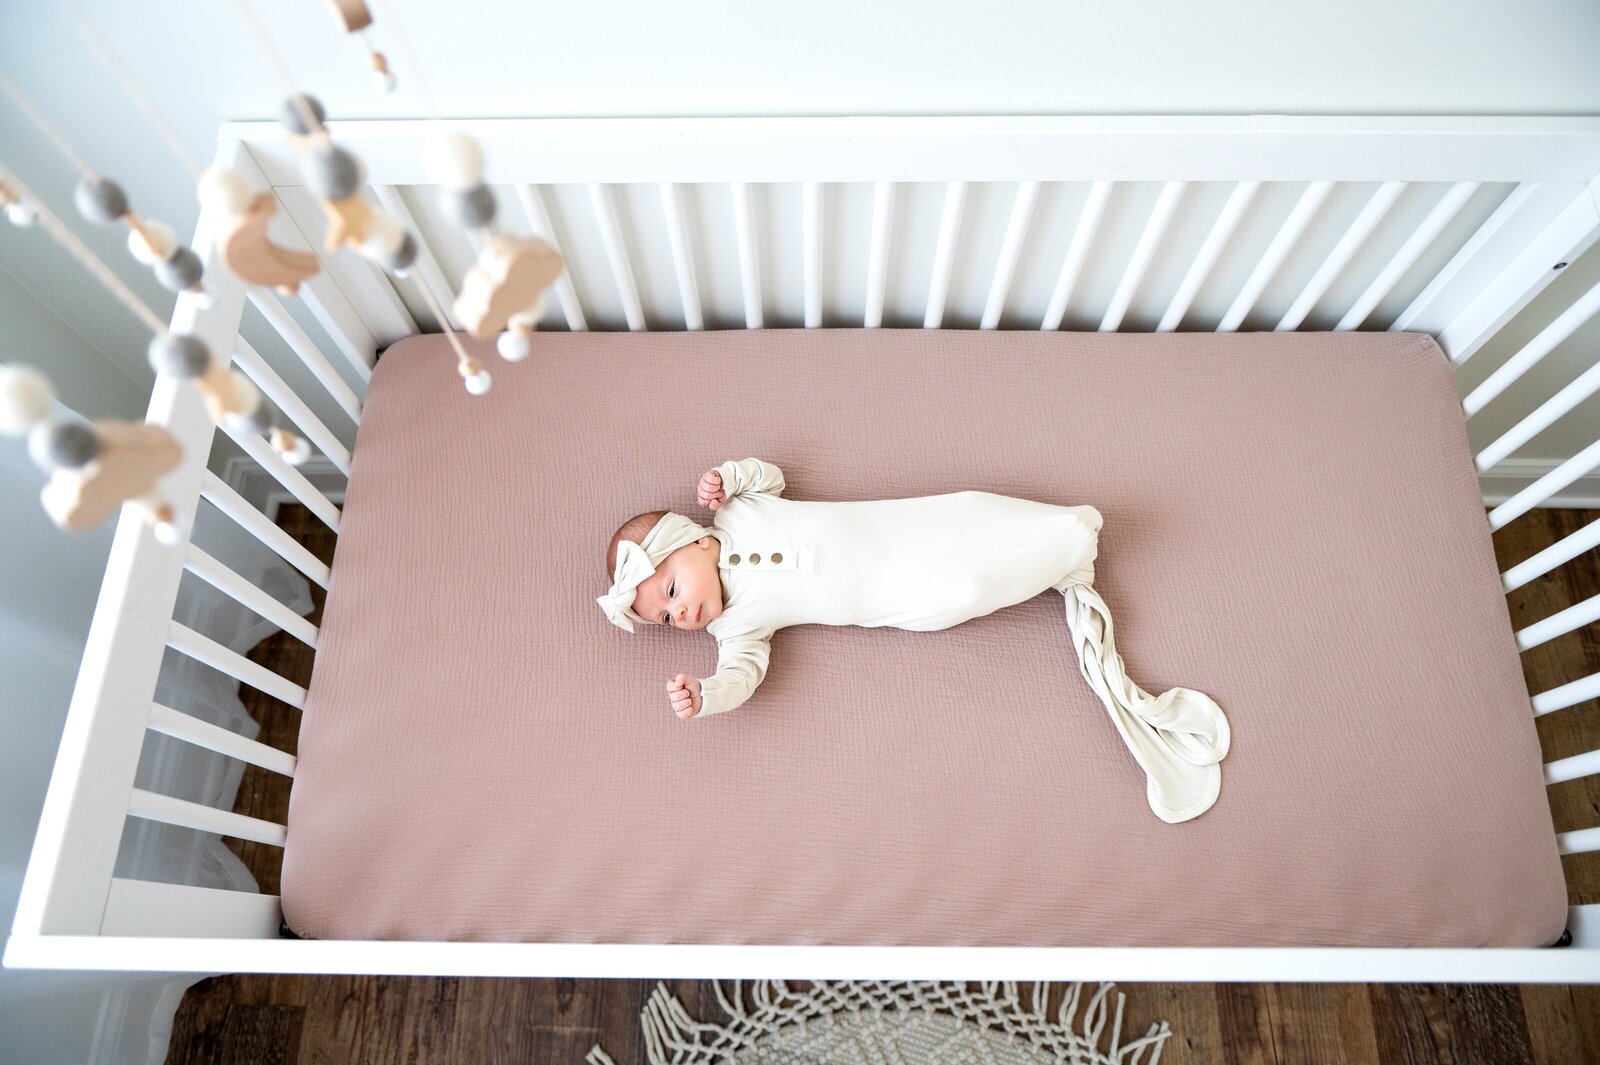 baby in a white outfit in her crib